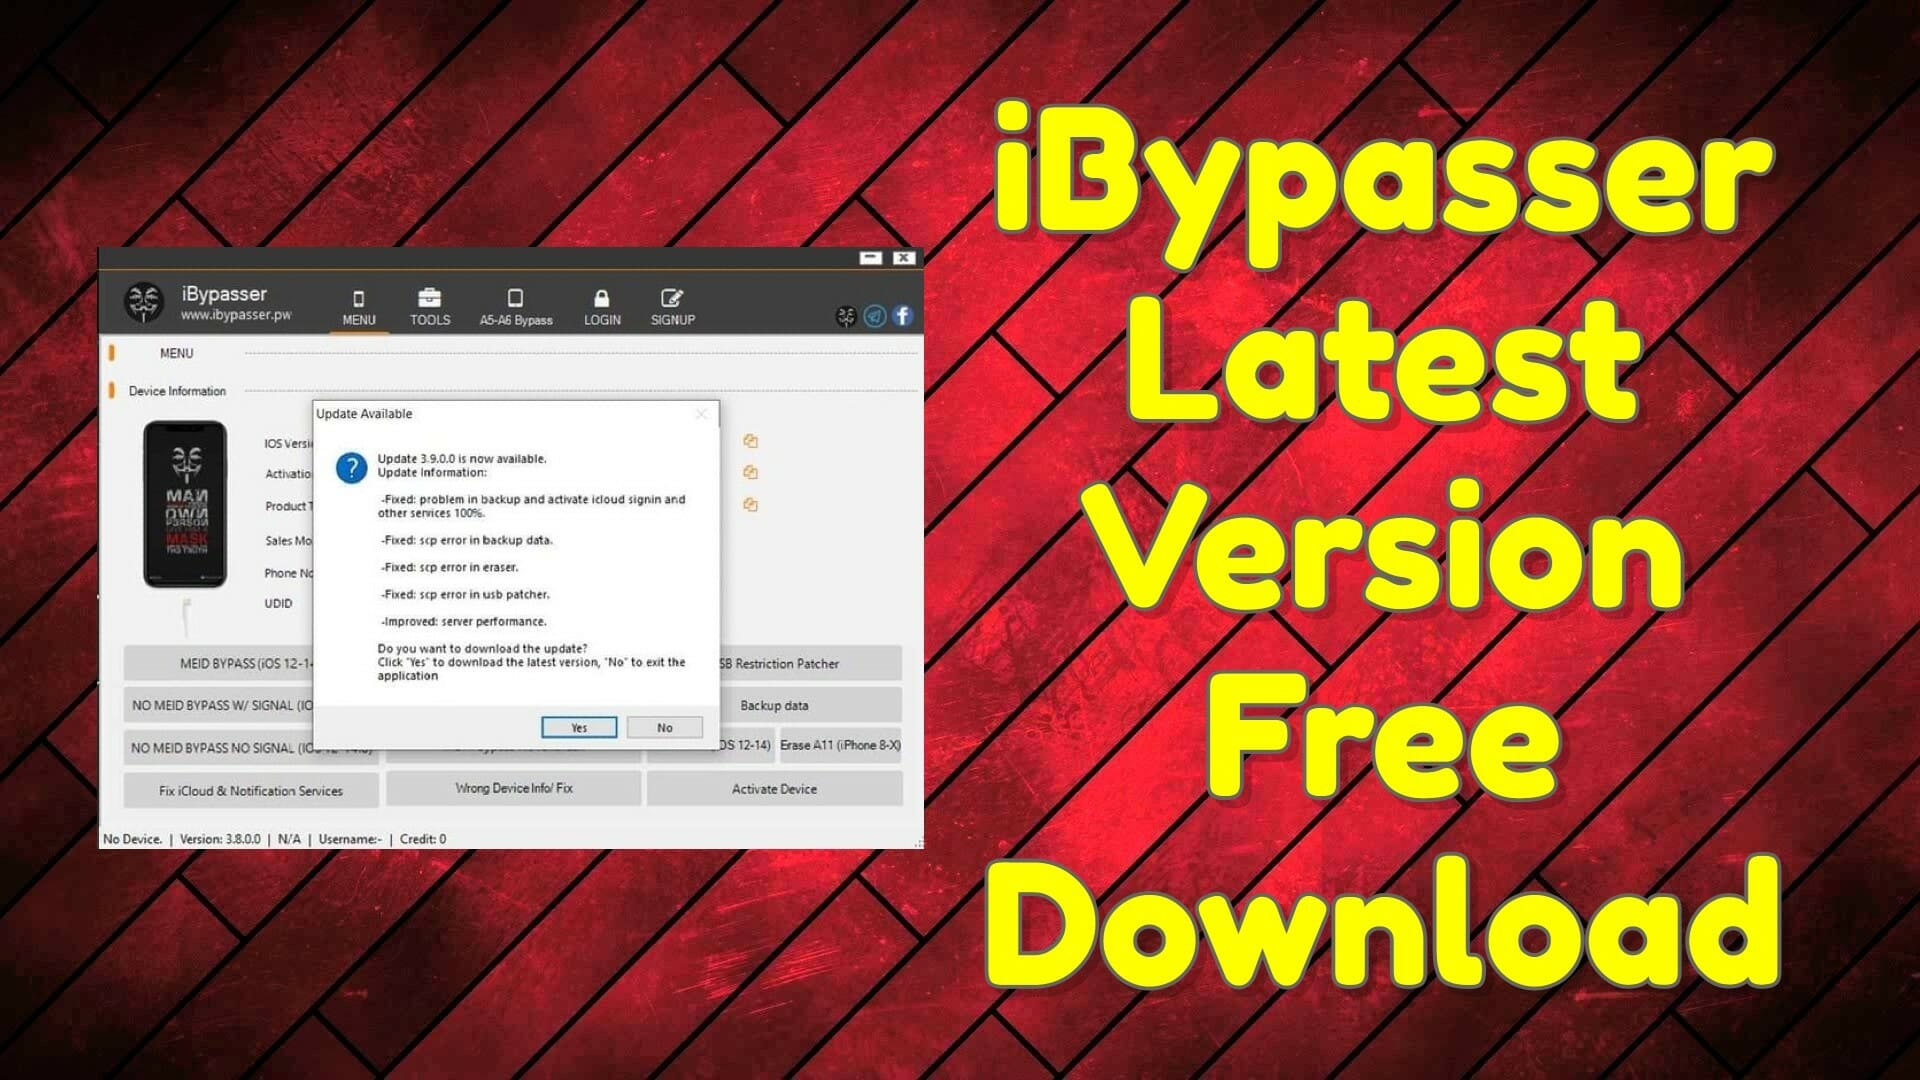 iBypasser Latest Version Free Download